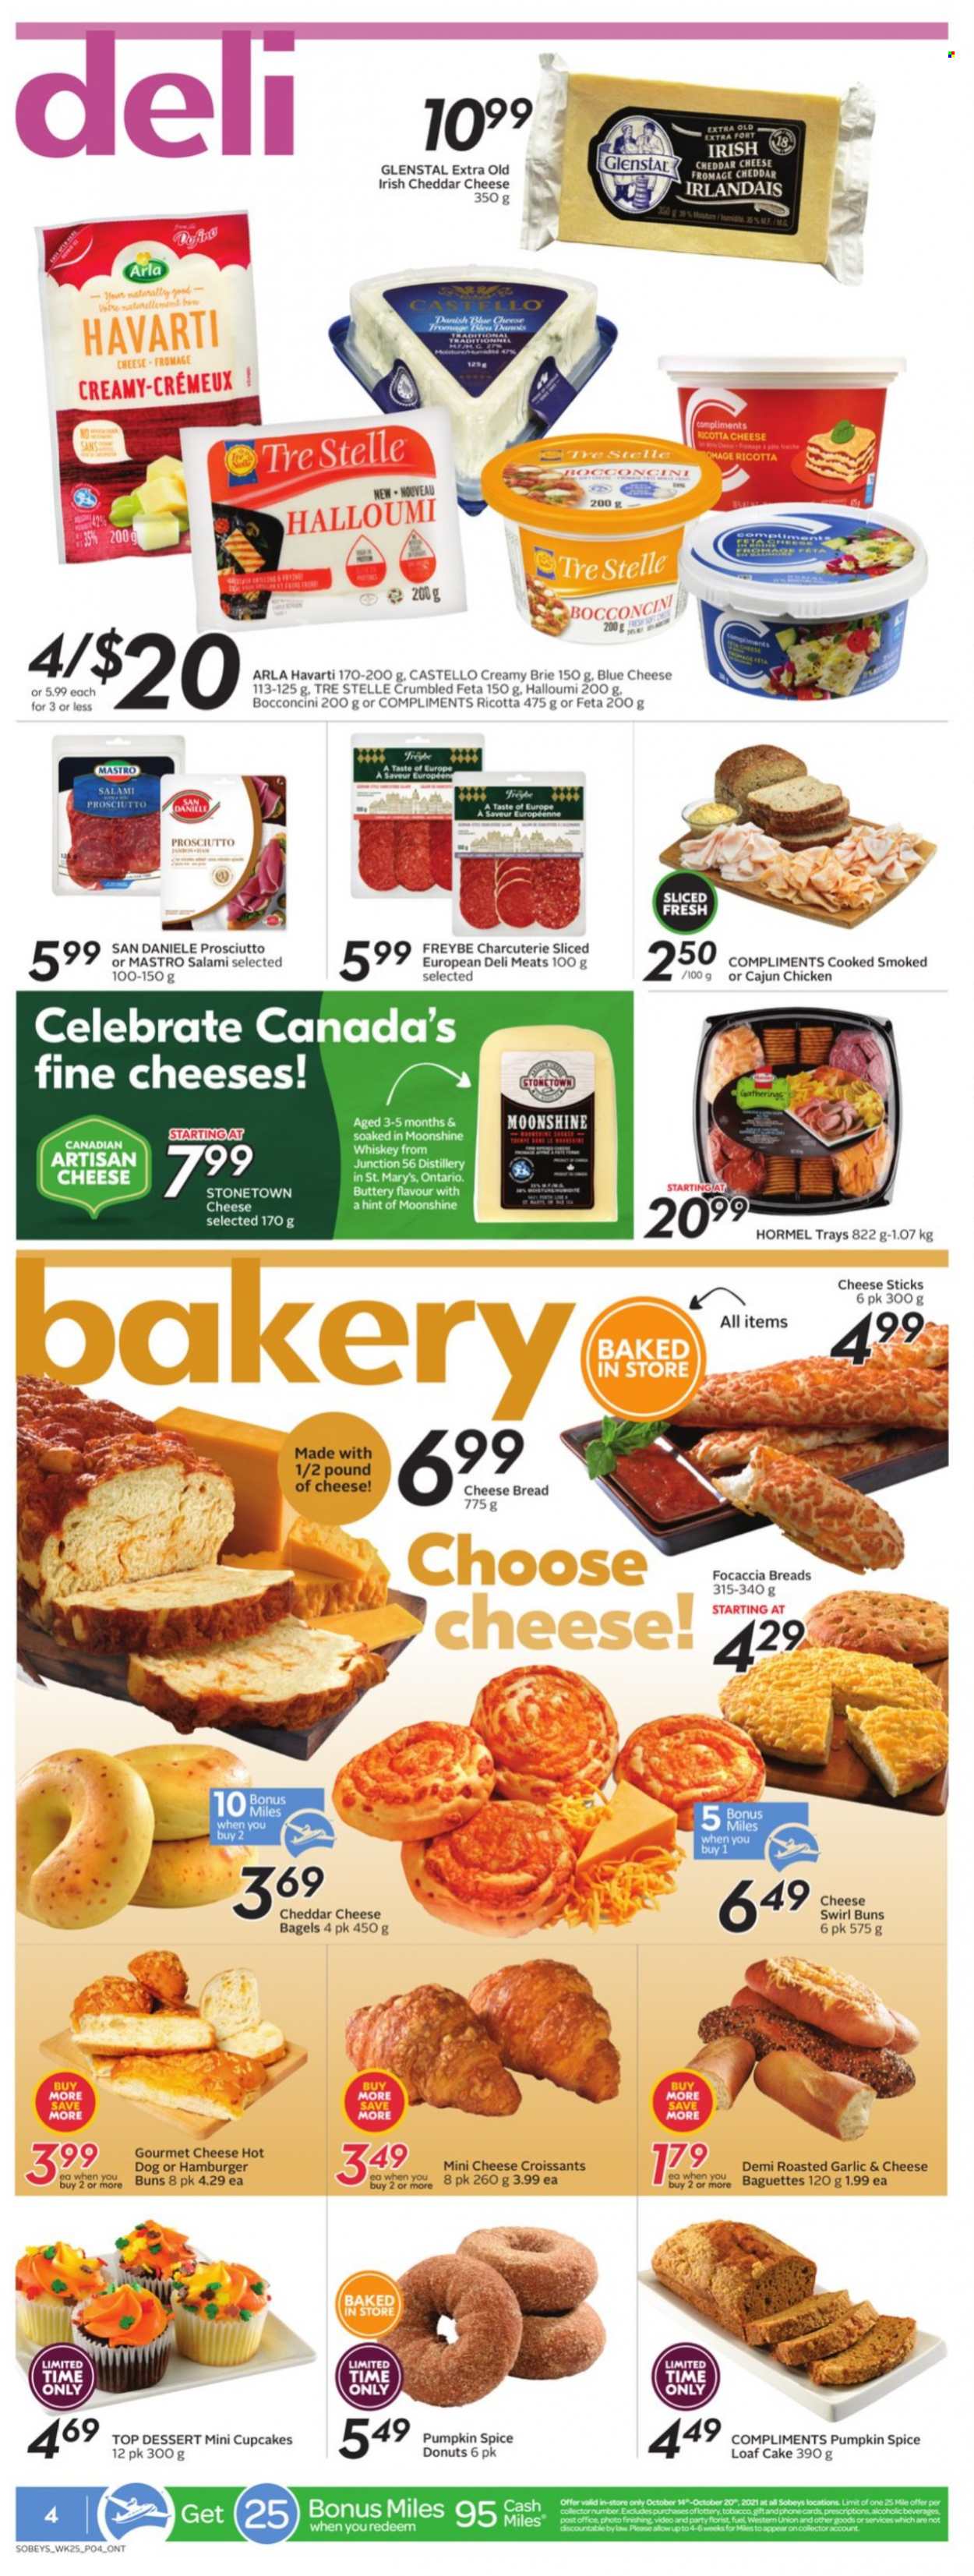 thumbnail - Sobeys Flyer - October 14, 2021 - October 20, 2021 - Sales products - bagels, bread, cake, croissant, buns, focaccia, cupcake, donut, loaf cake, hamburger, Hormel, salami, prosciutto, blue cheese, bocconcini, halloumi, Havarti, cheddar, brie, feta, Arla, cheese sticks, spice, fruit jam, whiskey, whisky, baguette, ricotta. Page 5.